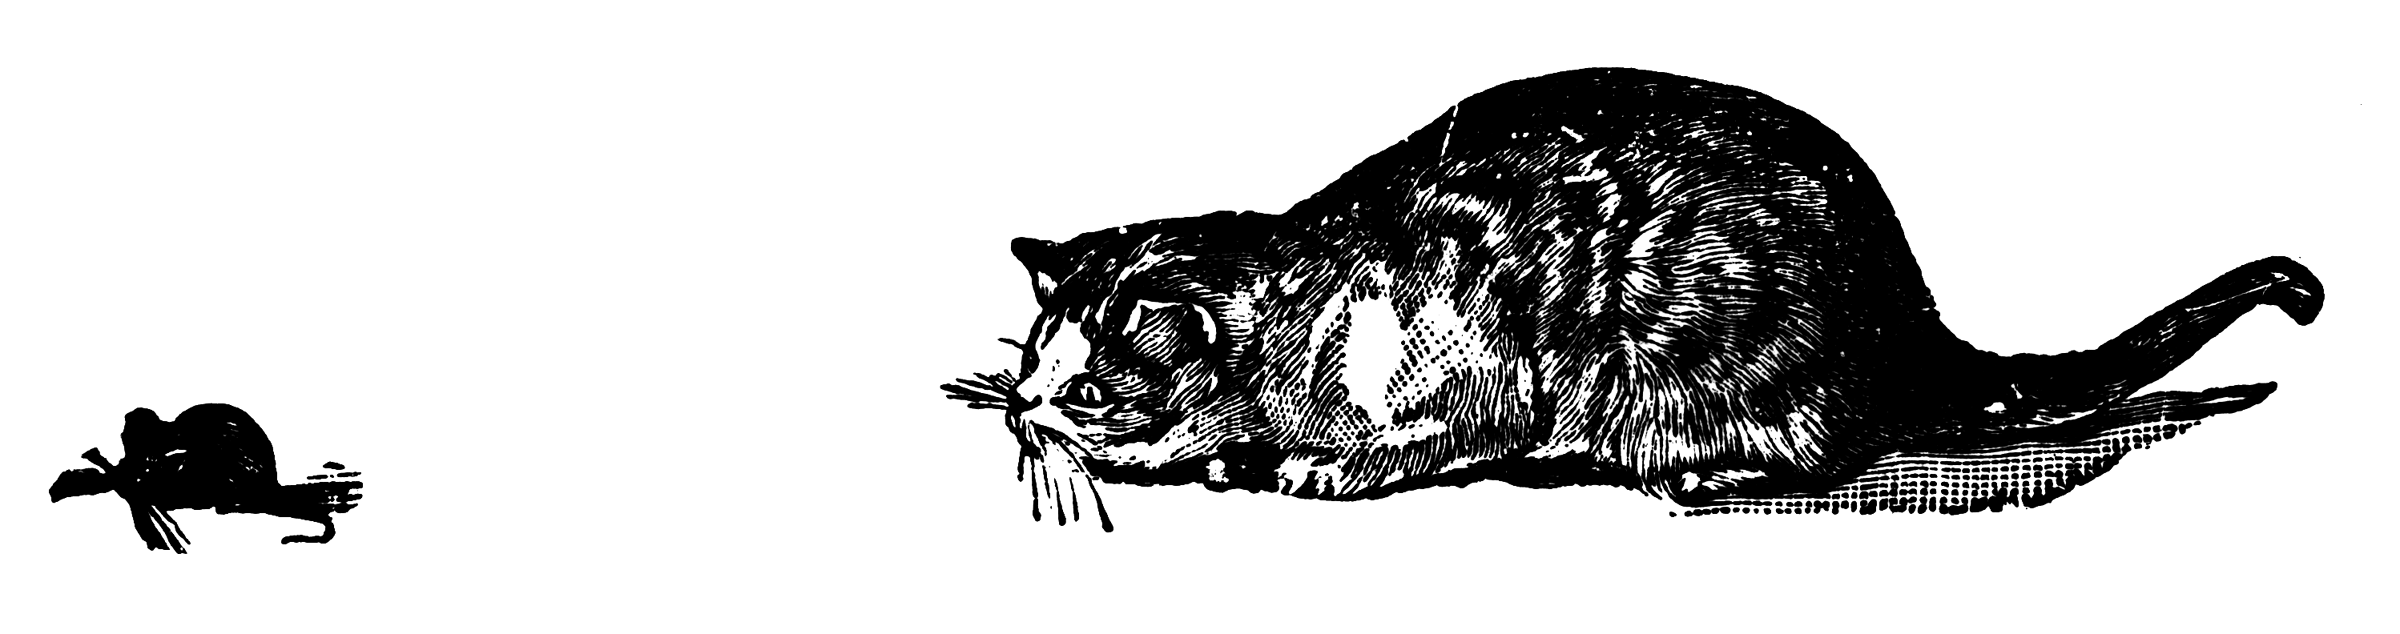 clipart cat and mouse - photo #11